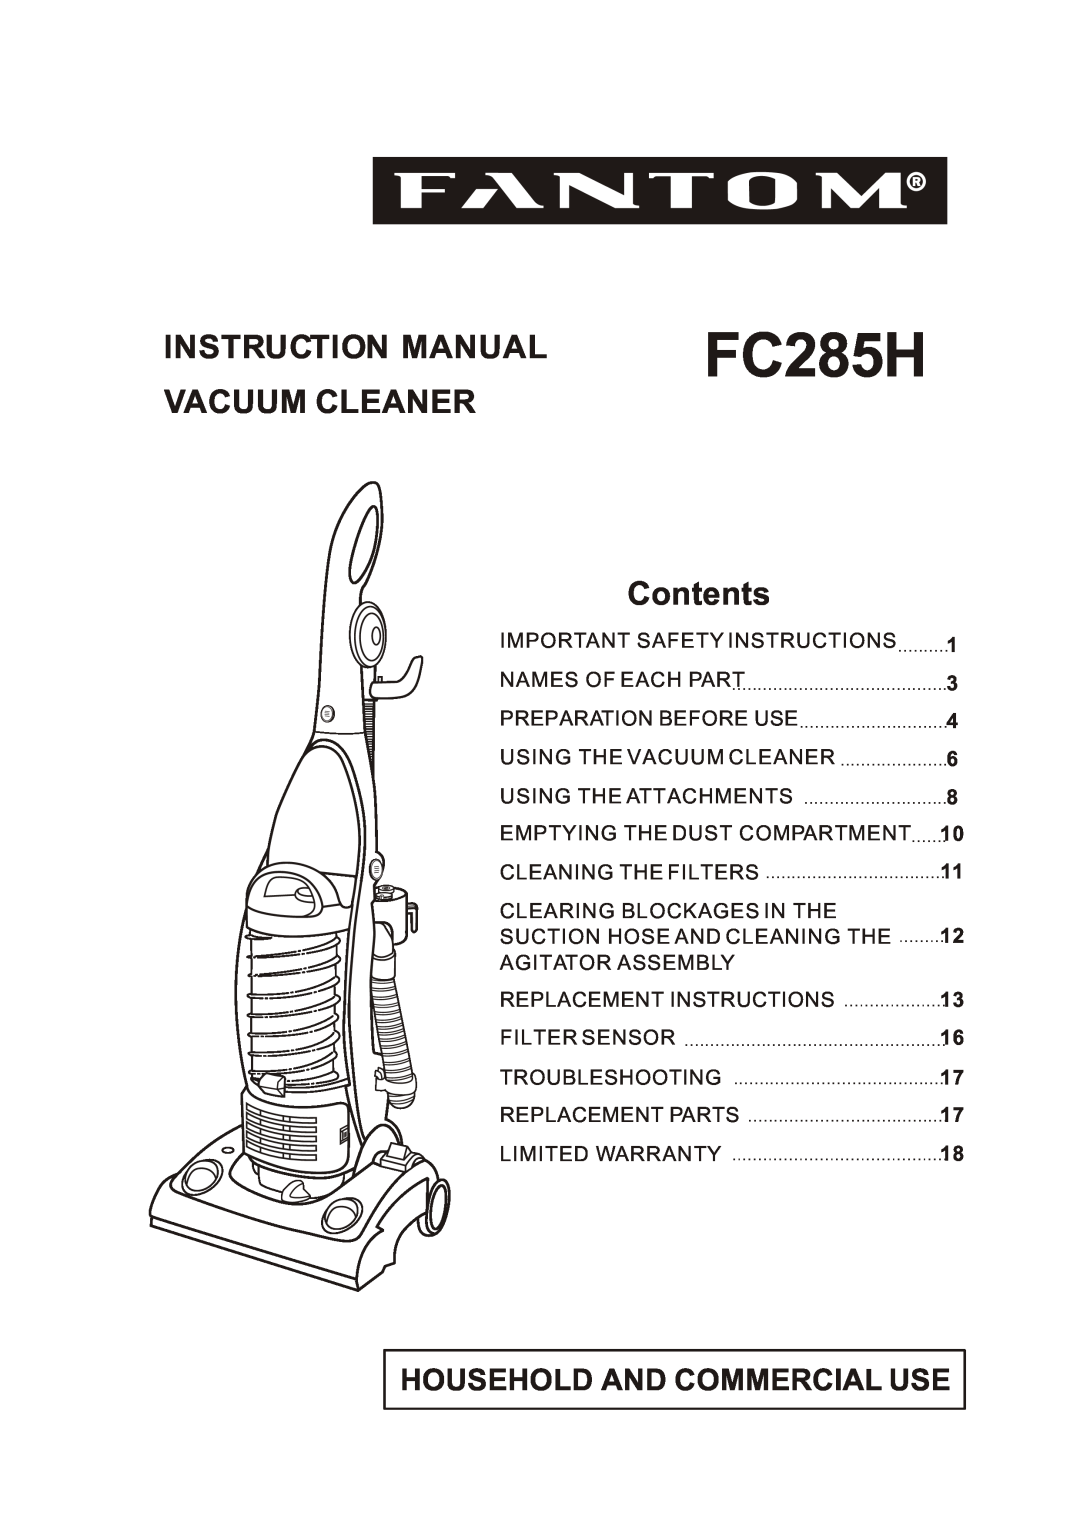 Fantom Vacuum FC285H instruction manual Vacuum Cleaner, Contents, 1 3 4 6 8 10 11 12 13 16, Household And Commercial Use 